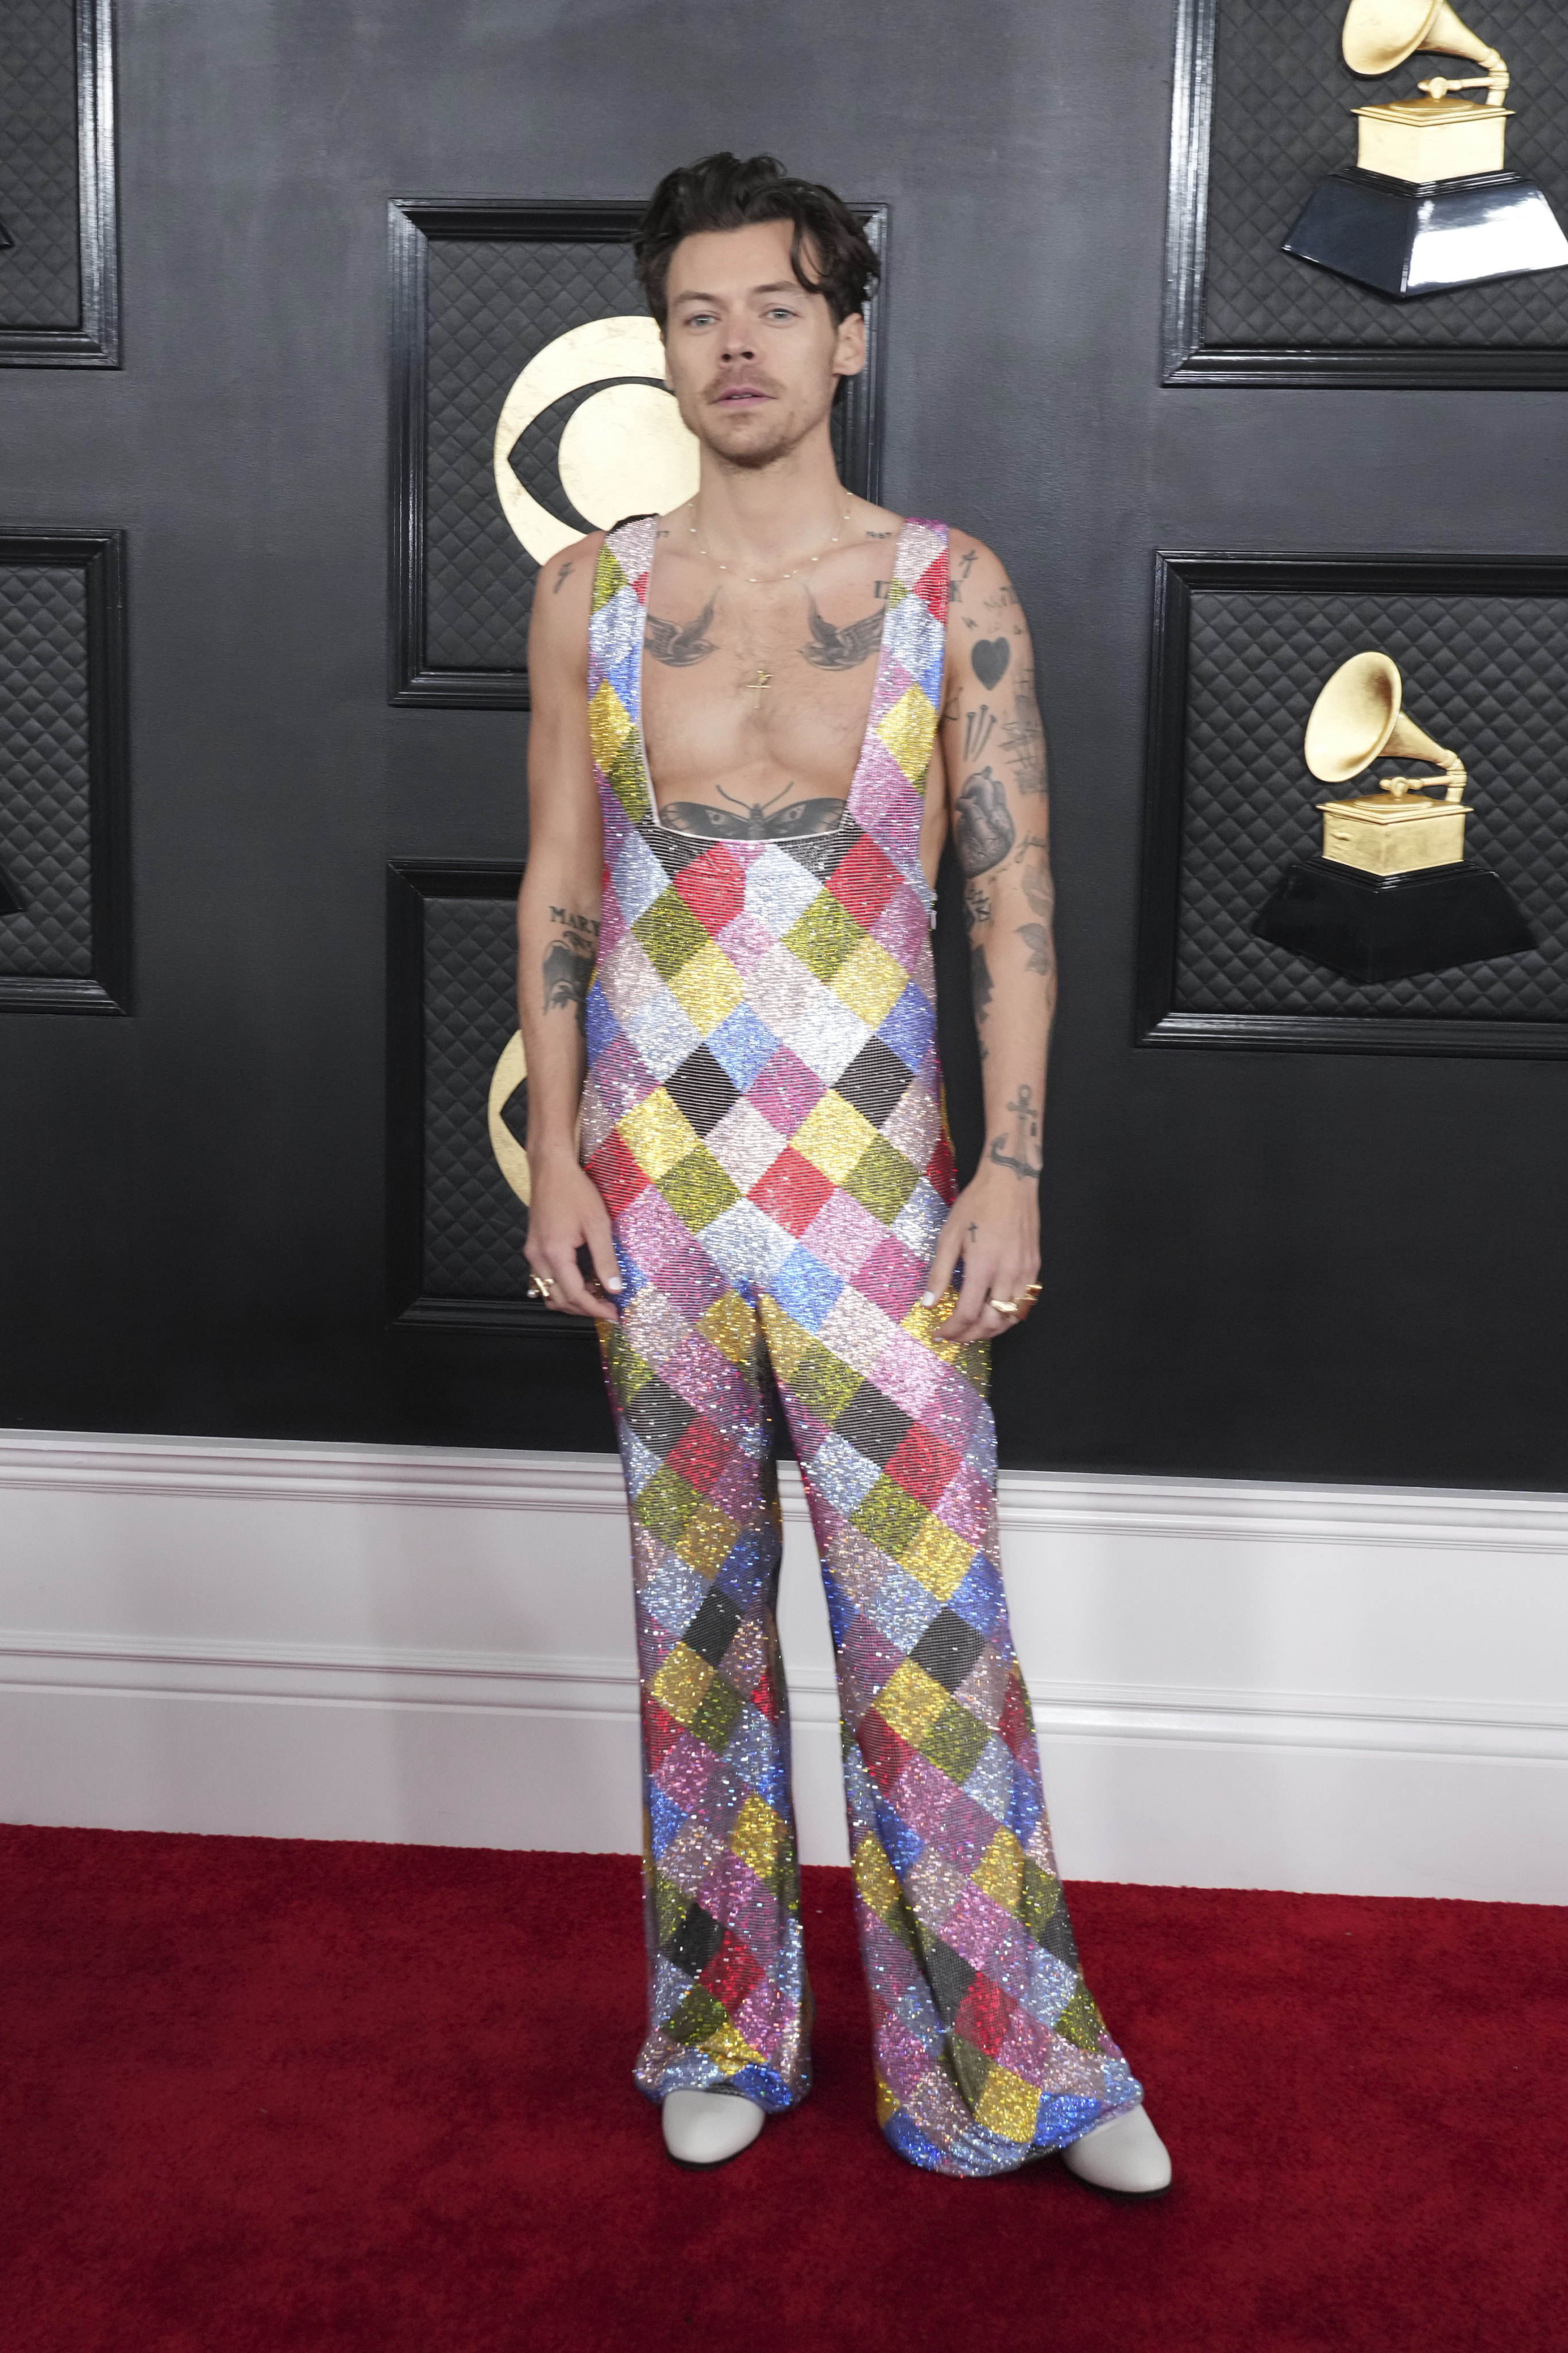 Harry Styles arrives for the Grammy Awards ceremony in a low-cut EgonLab jumpsuit. Photo: Jordan Strauss/Invision/AP